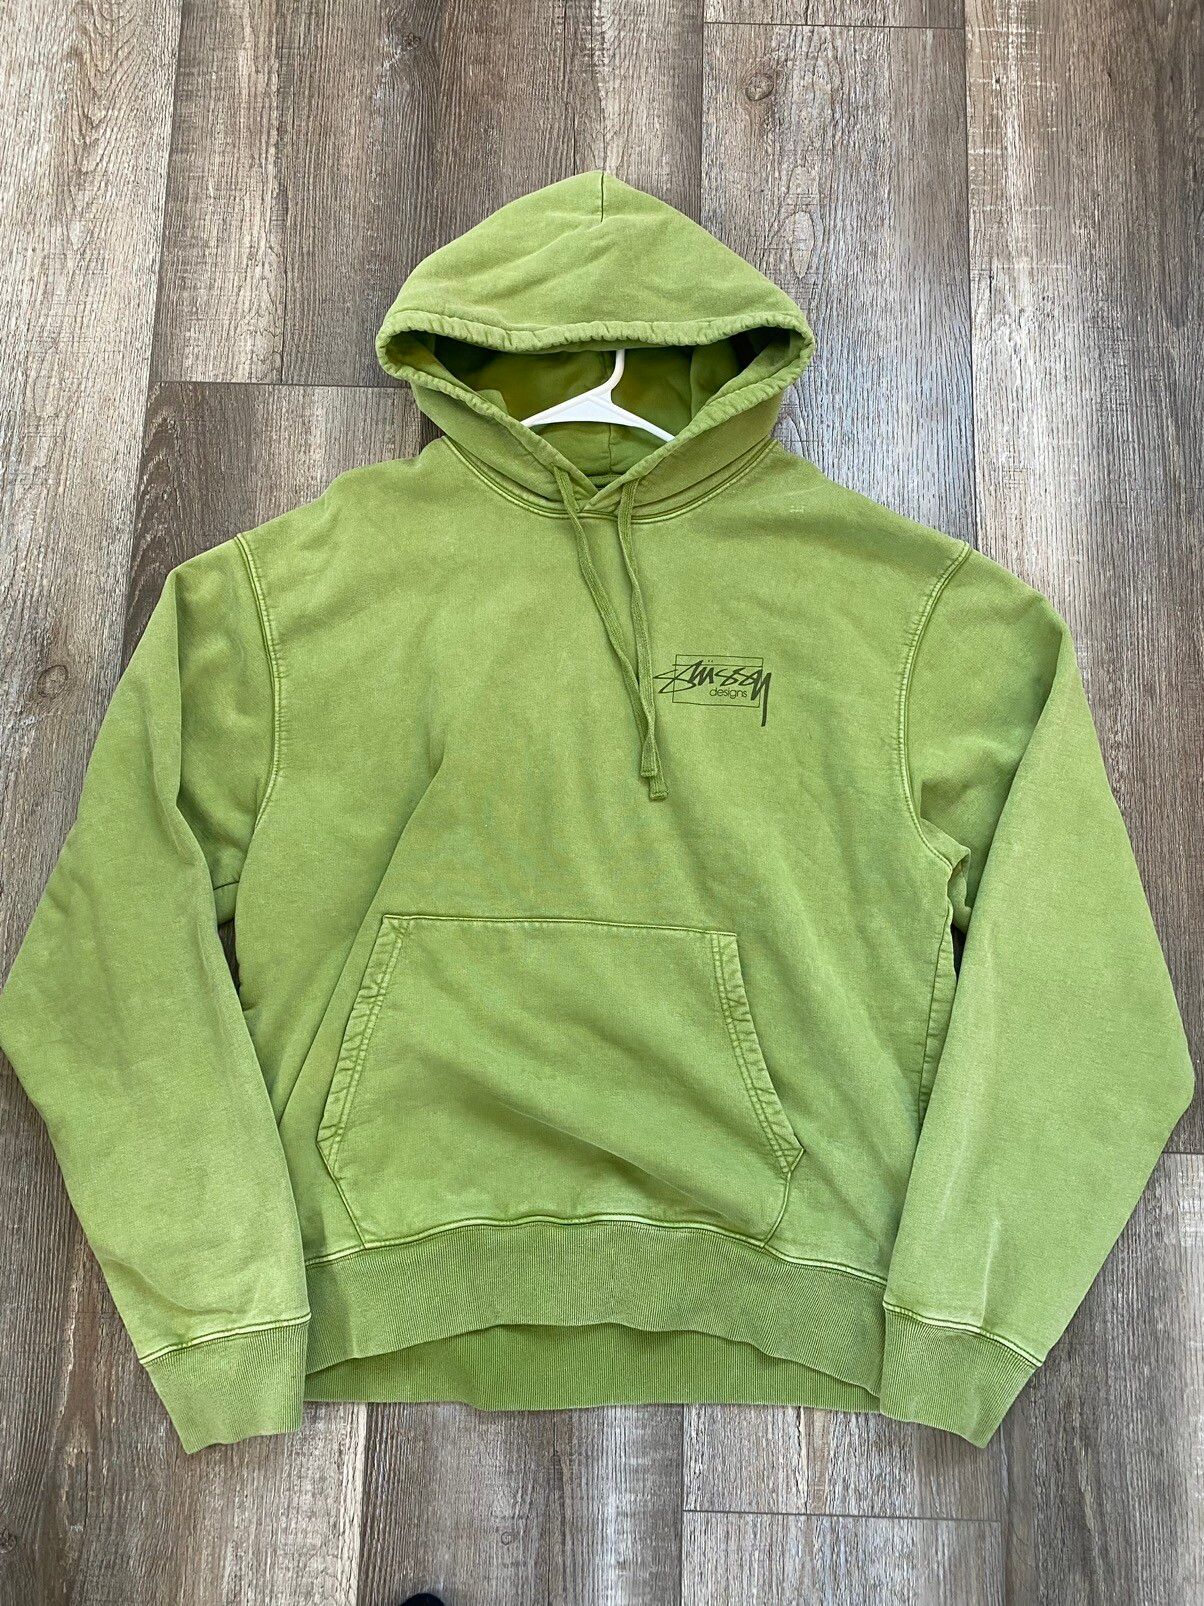 Stussy Over-dyed Stussy Designs Hoodie Size US XL / EU 56 / 4 - 1 Preview